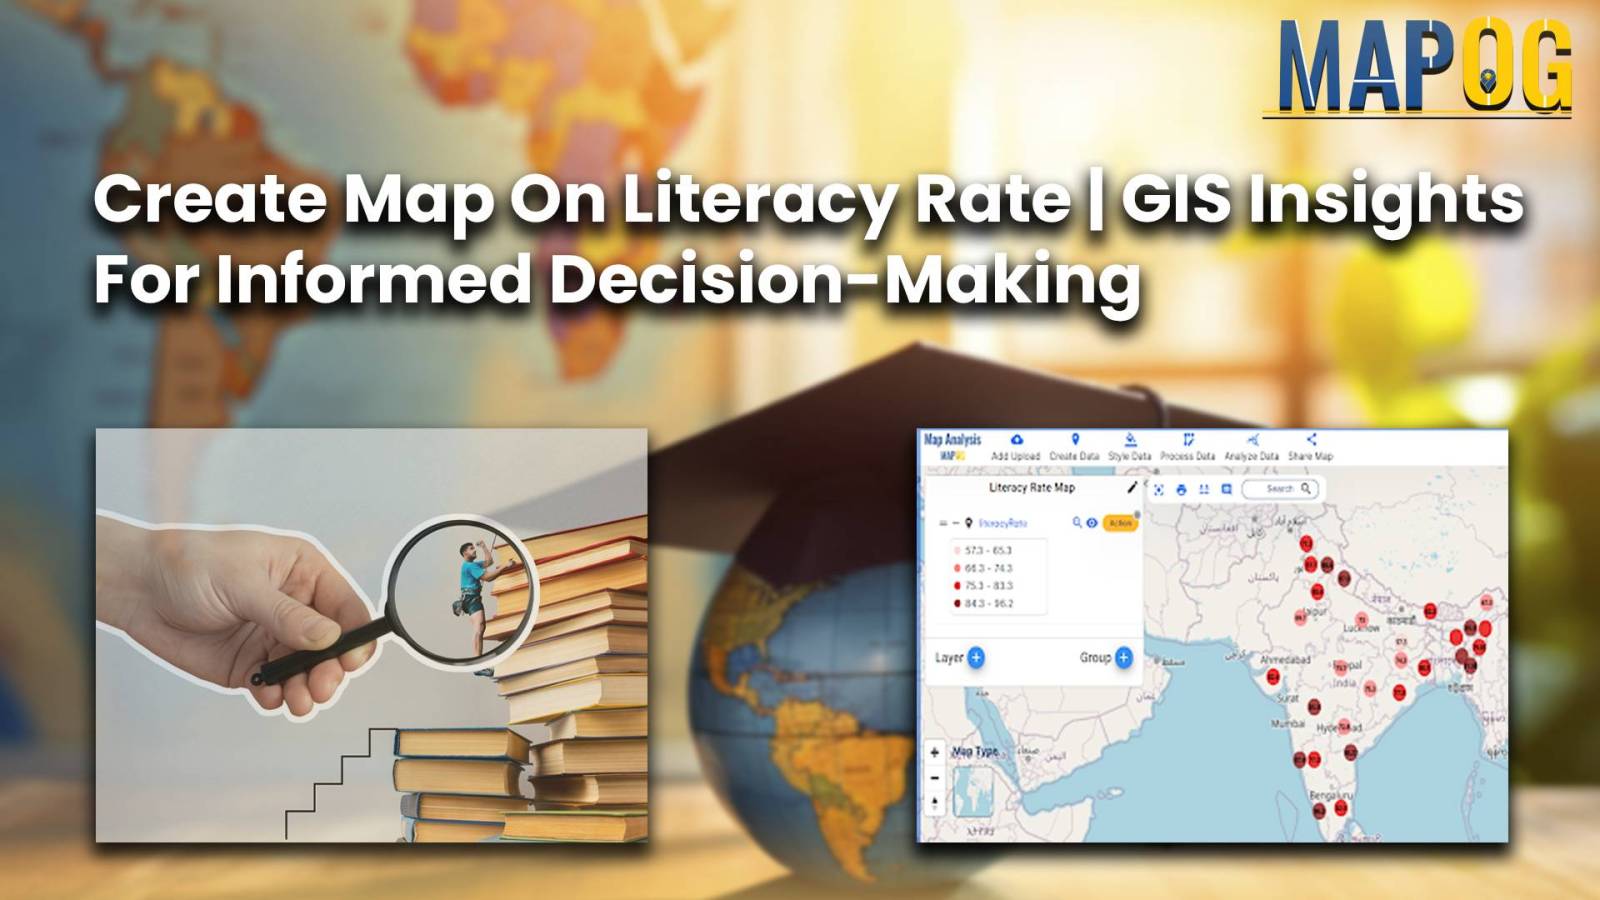 Create Map on Literacy Rate